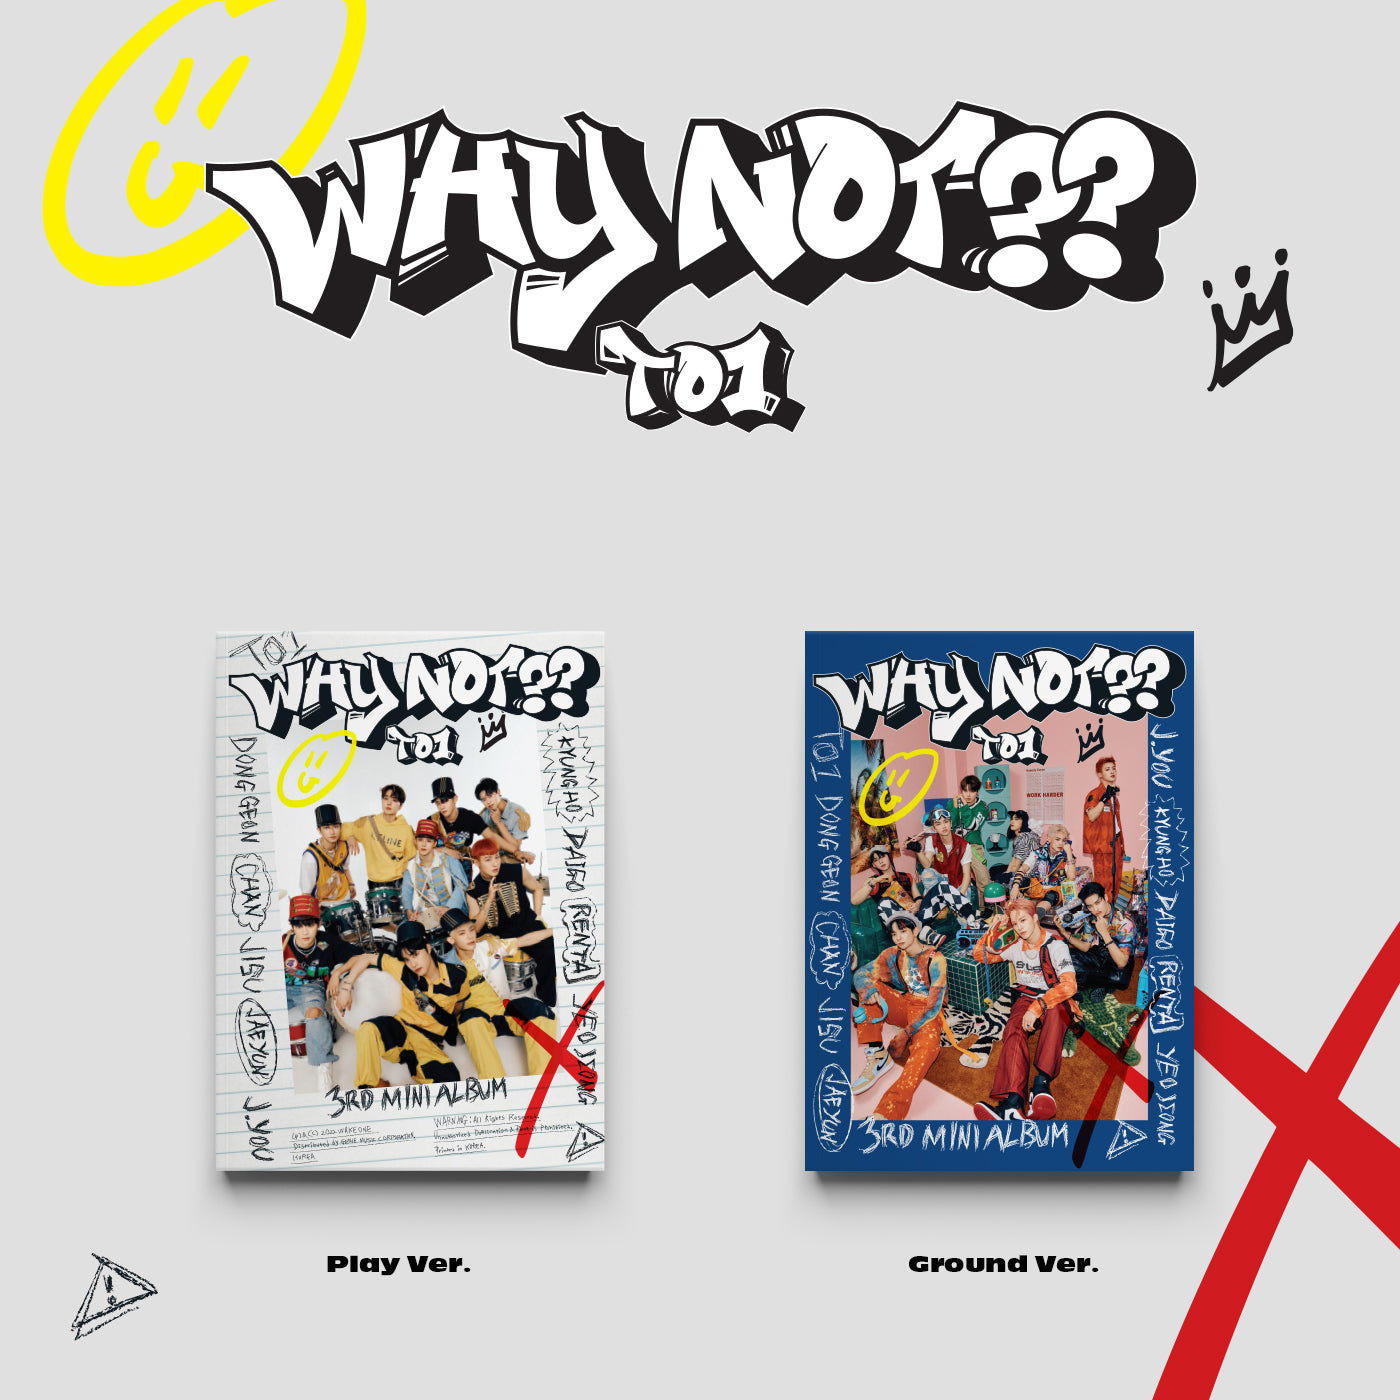 TO1 3RD MINI ALBUM 'WHY NOT??' COVER